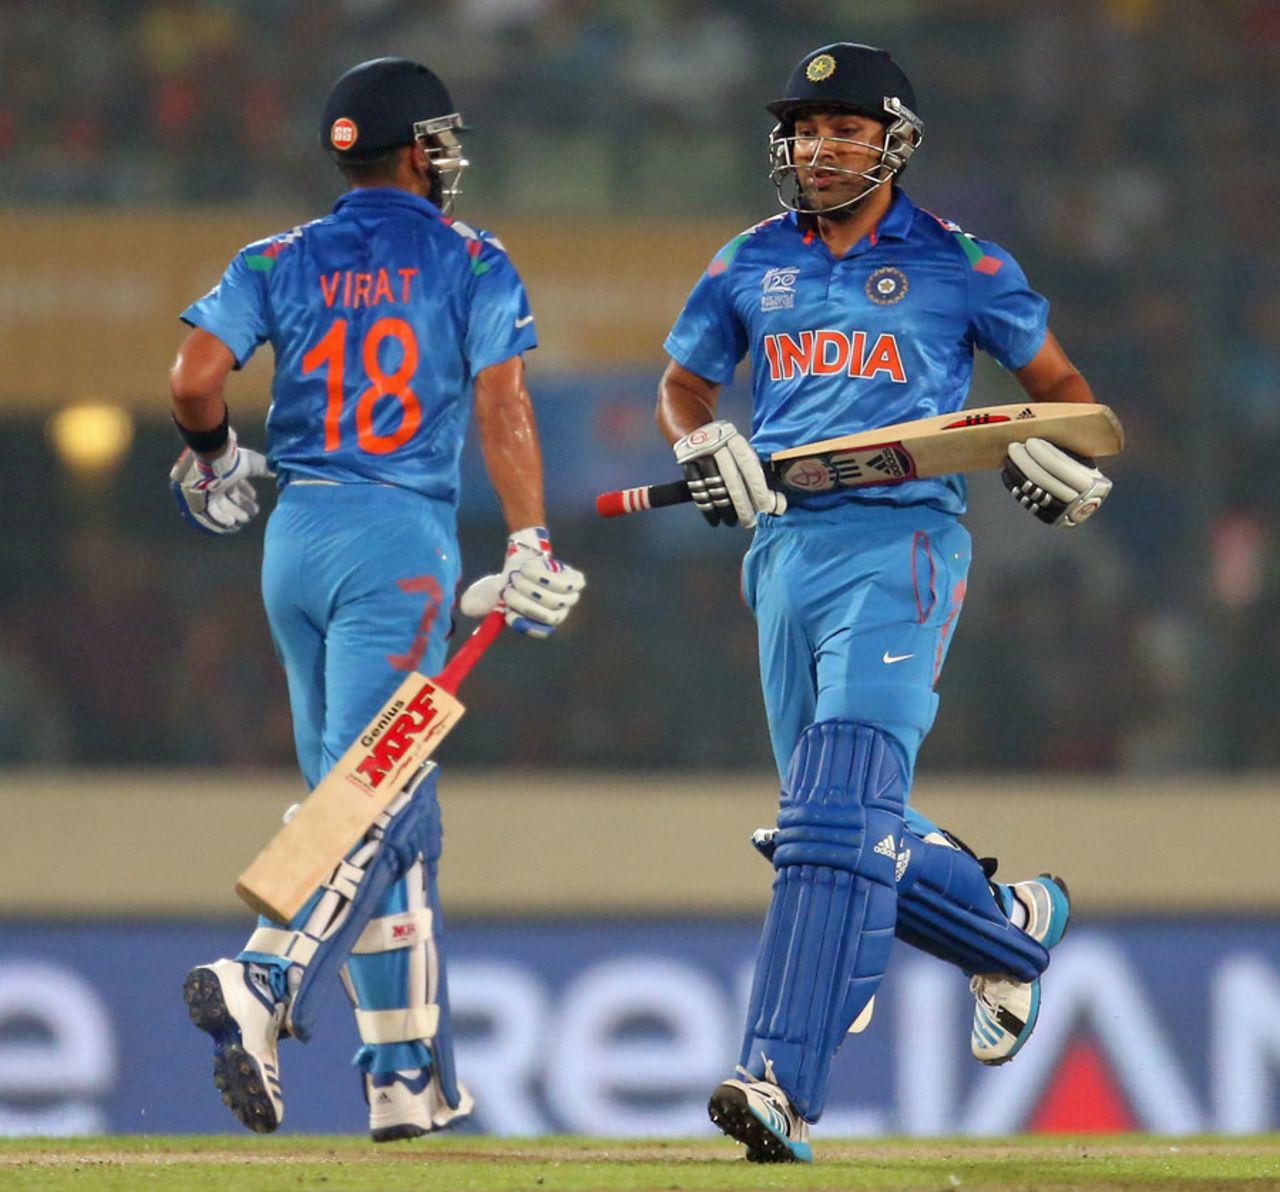 Virat Kohli and Rohit Sharma shared a 100-run second-wicket stand, Bangladesh v India, World T20, Group 2, Mirpur, March 28, 2014